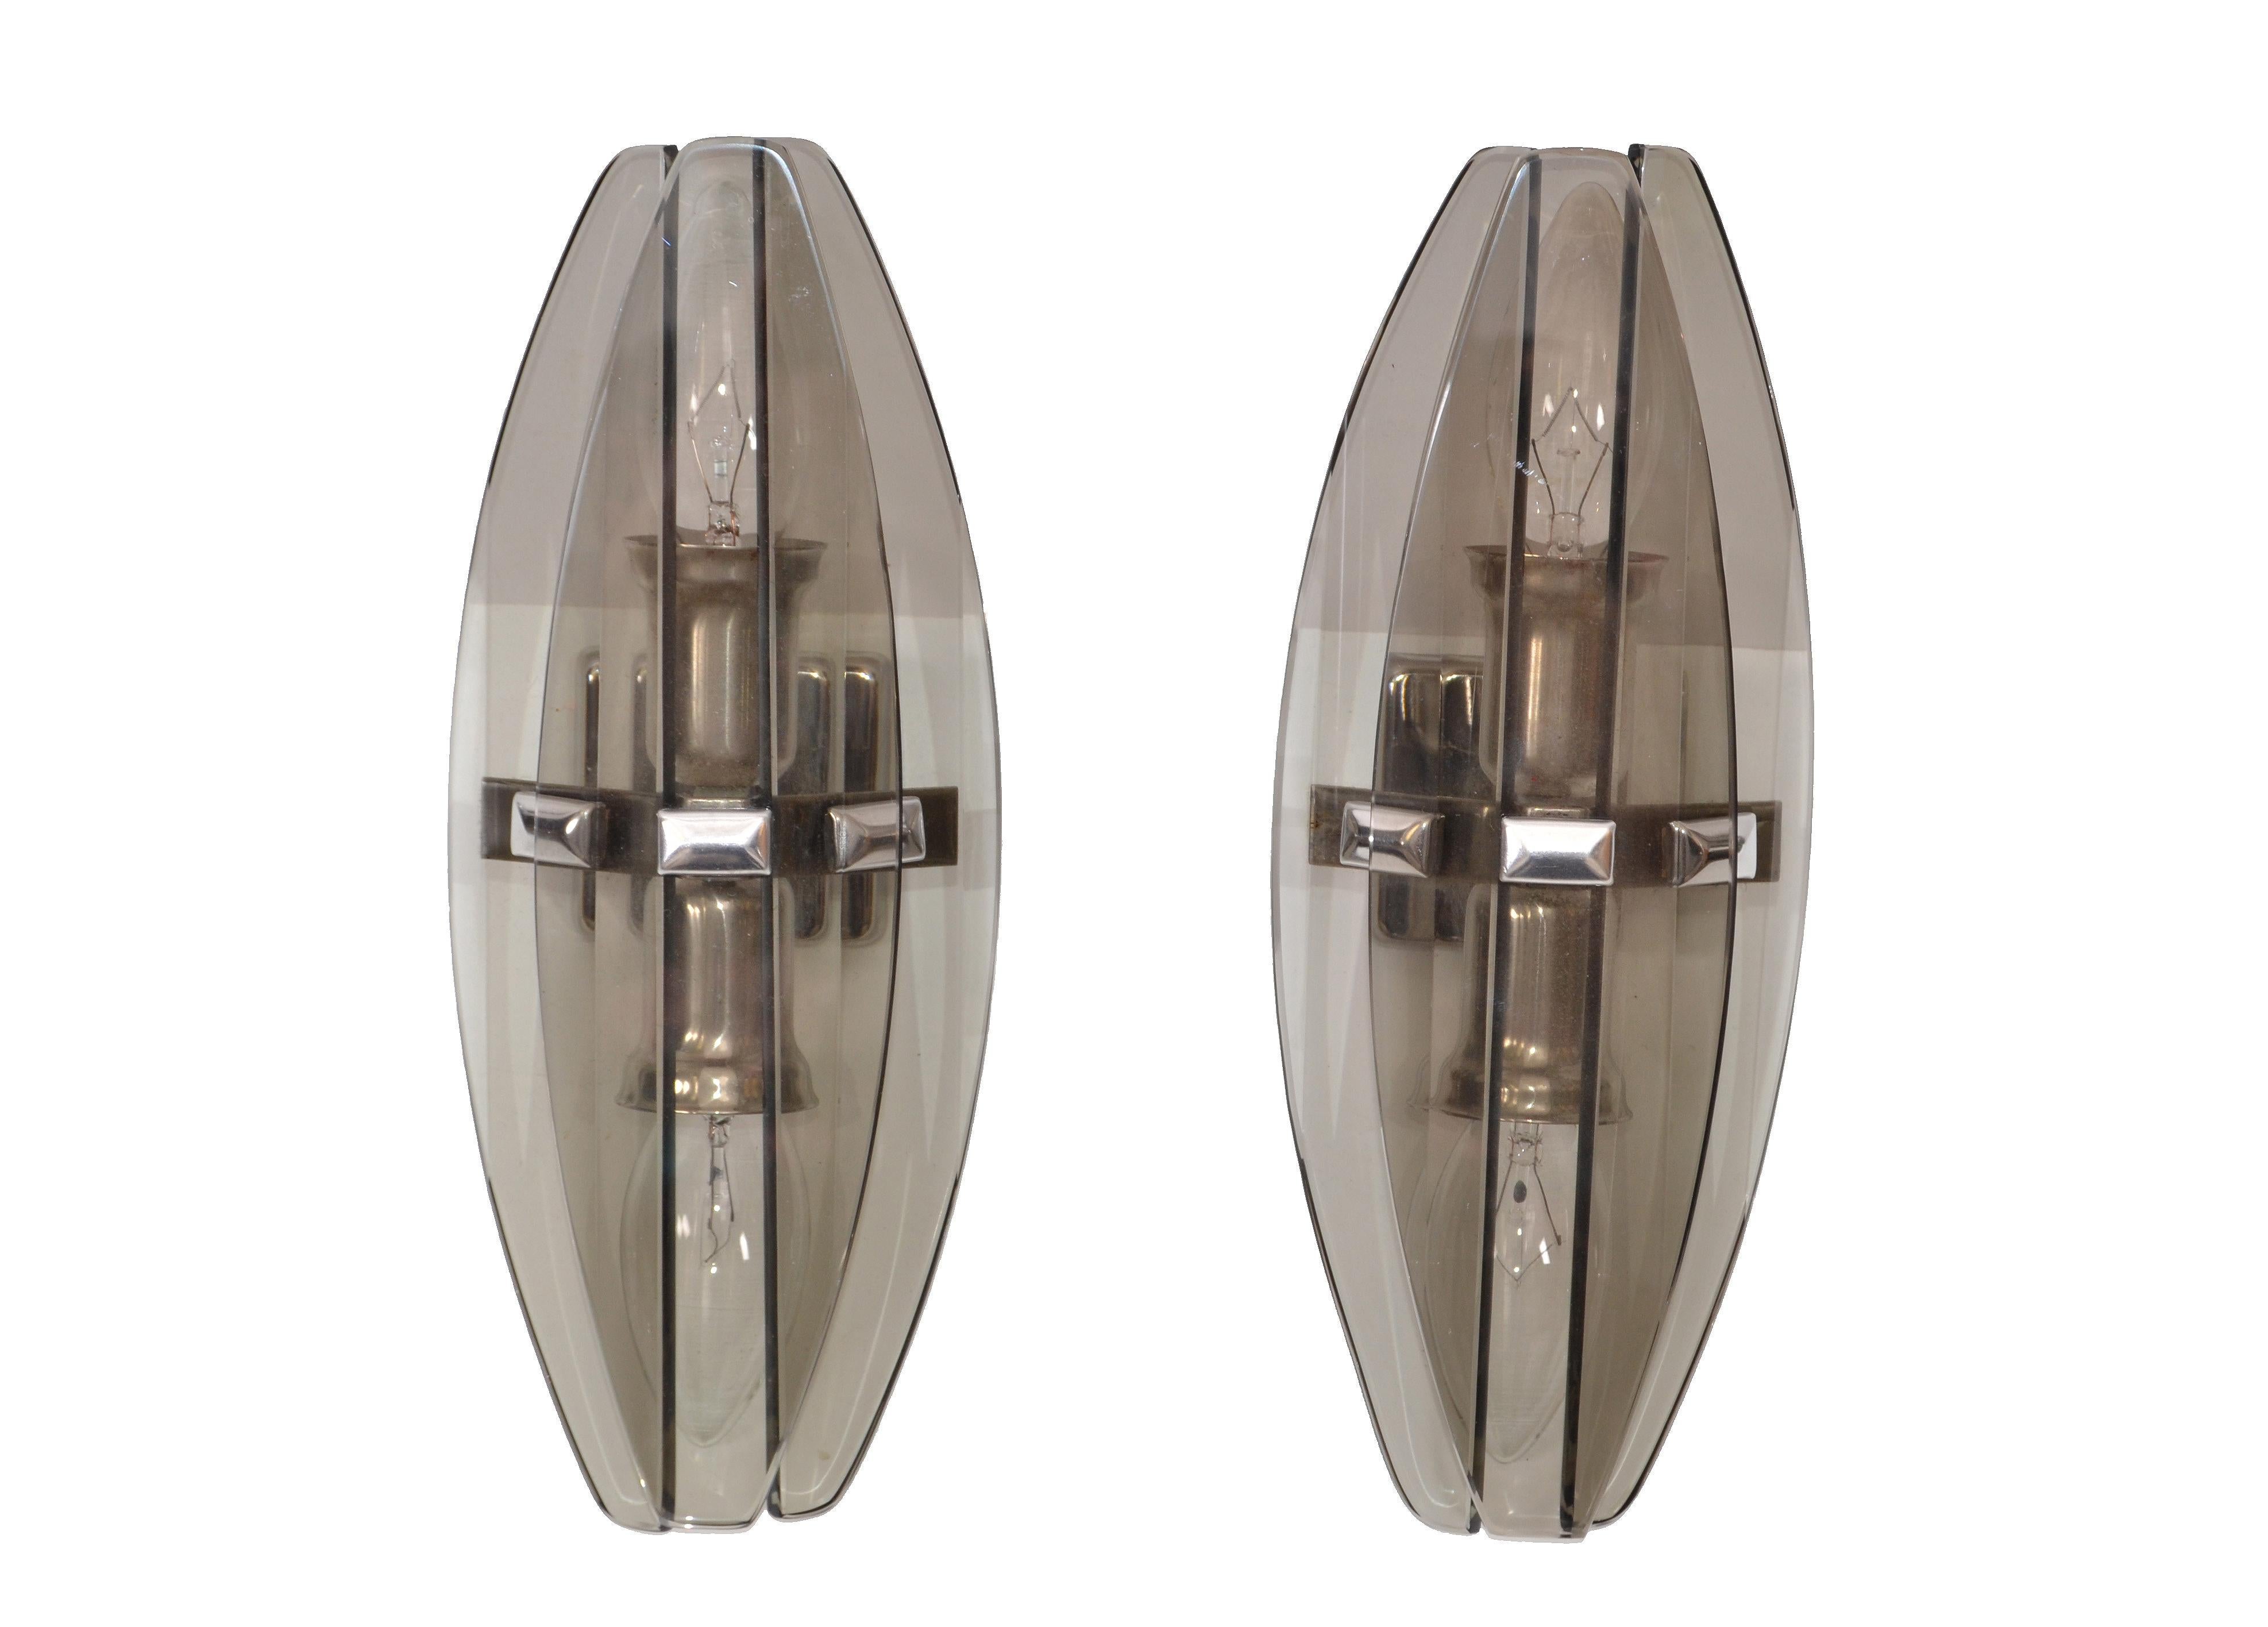 Italian Mid-Century Modern superb pair of smoked glass blades wall sconces styled after Fontana Arte.
Each sconce takes 2 candelabra light bulbs with max. 40 watts.
In perfect working condition.
Back plate measures: 2.25 x 1.5 inches.